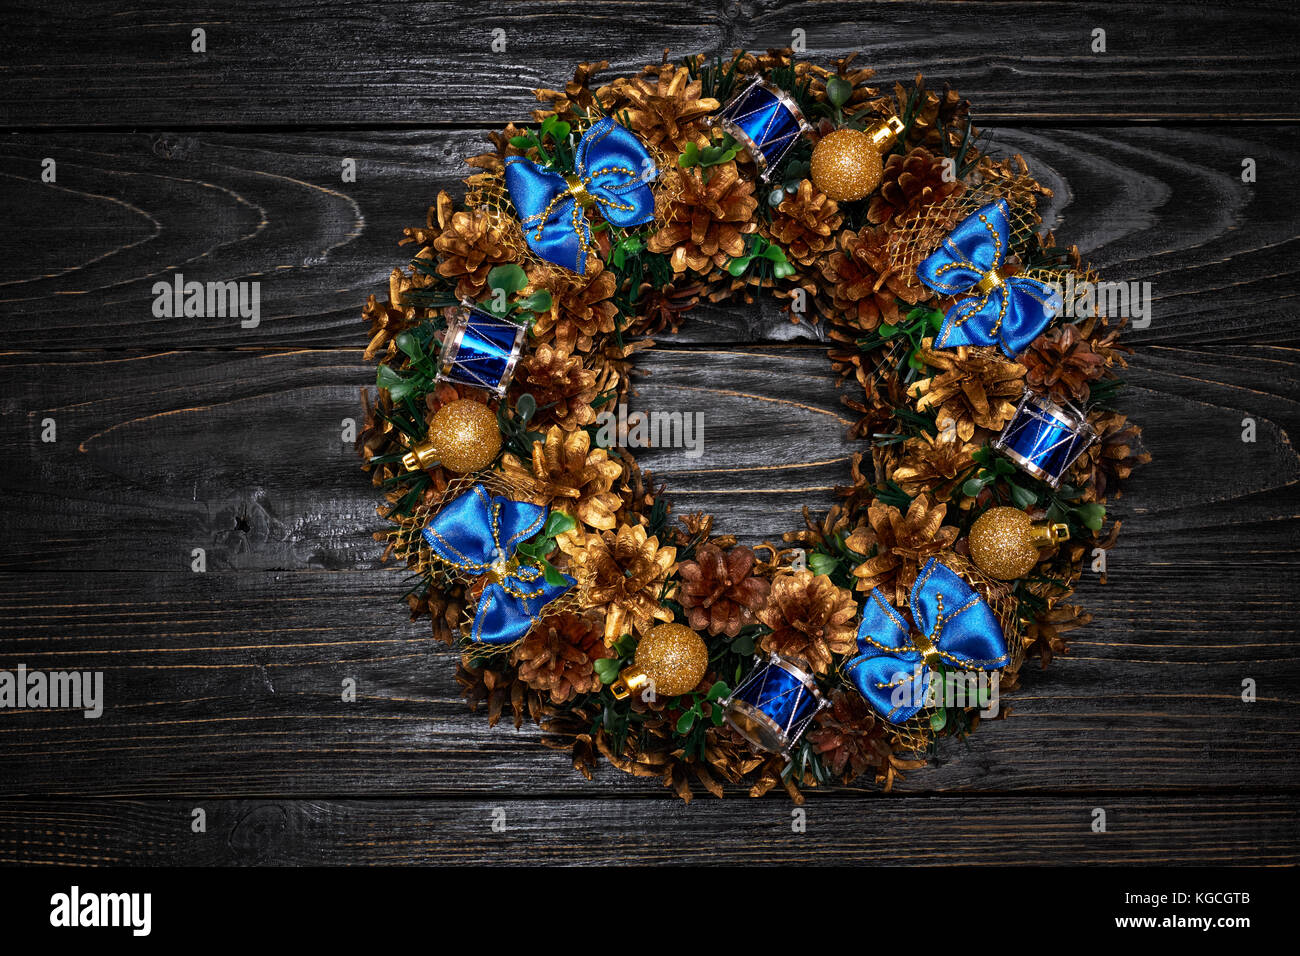 Christmas wreath on wooden background Stock Photo